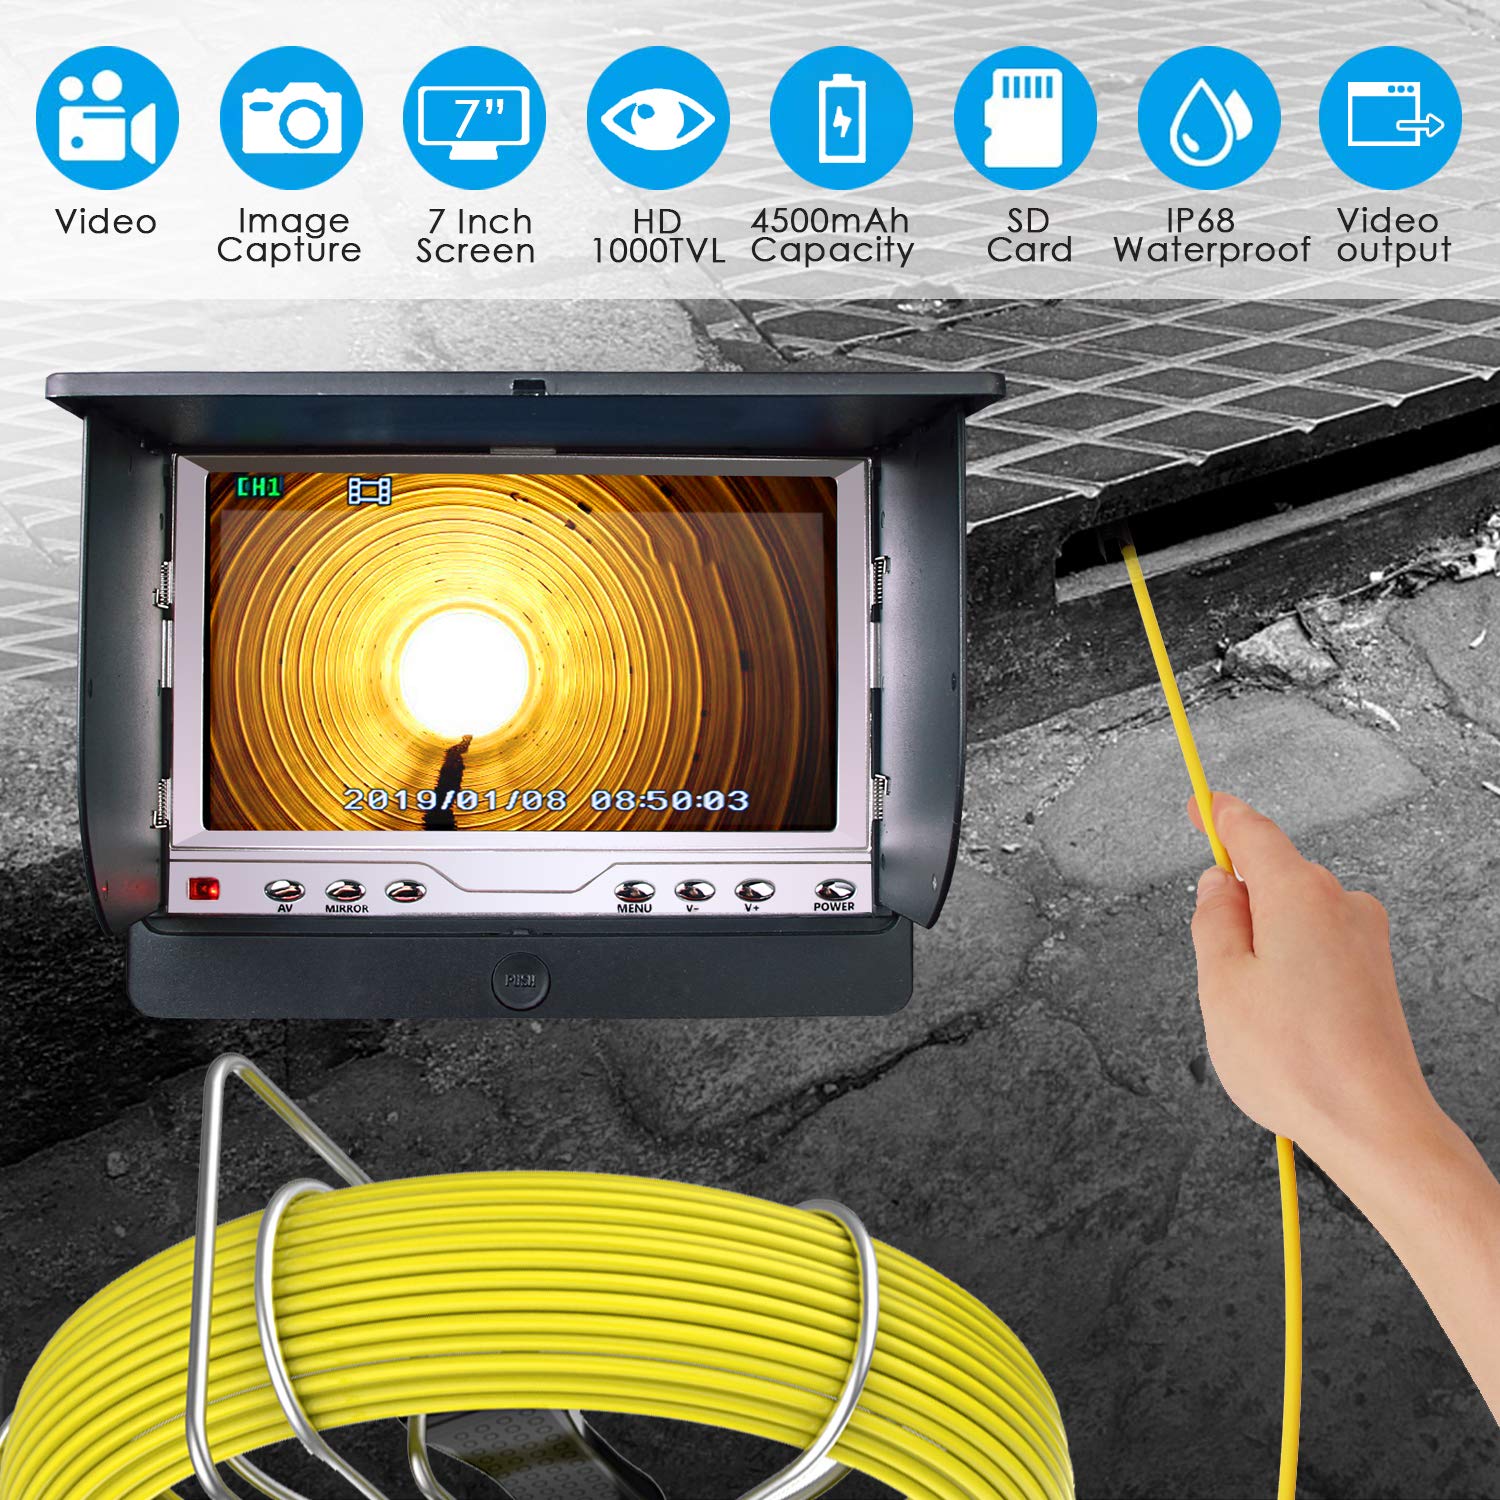 7inch LCD 30M Pipe Inspection 1000 TVL Video Camera Waterproof Drain Pipe Sewer 